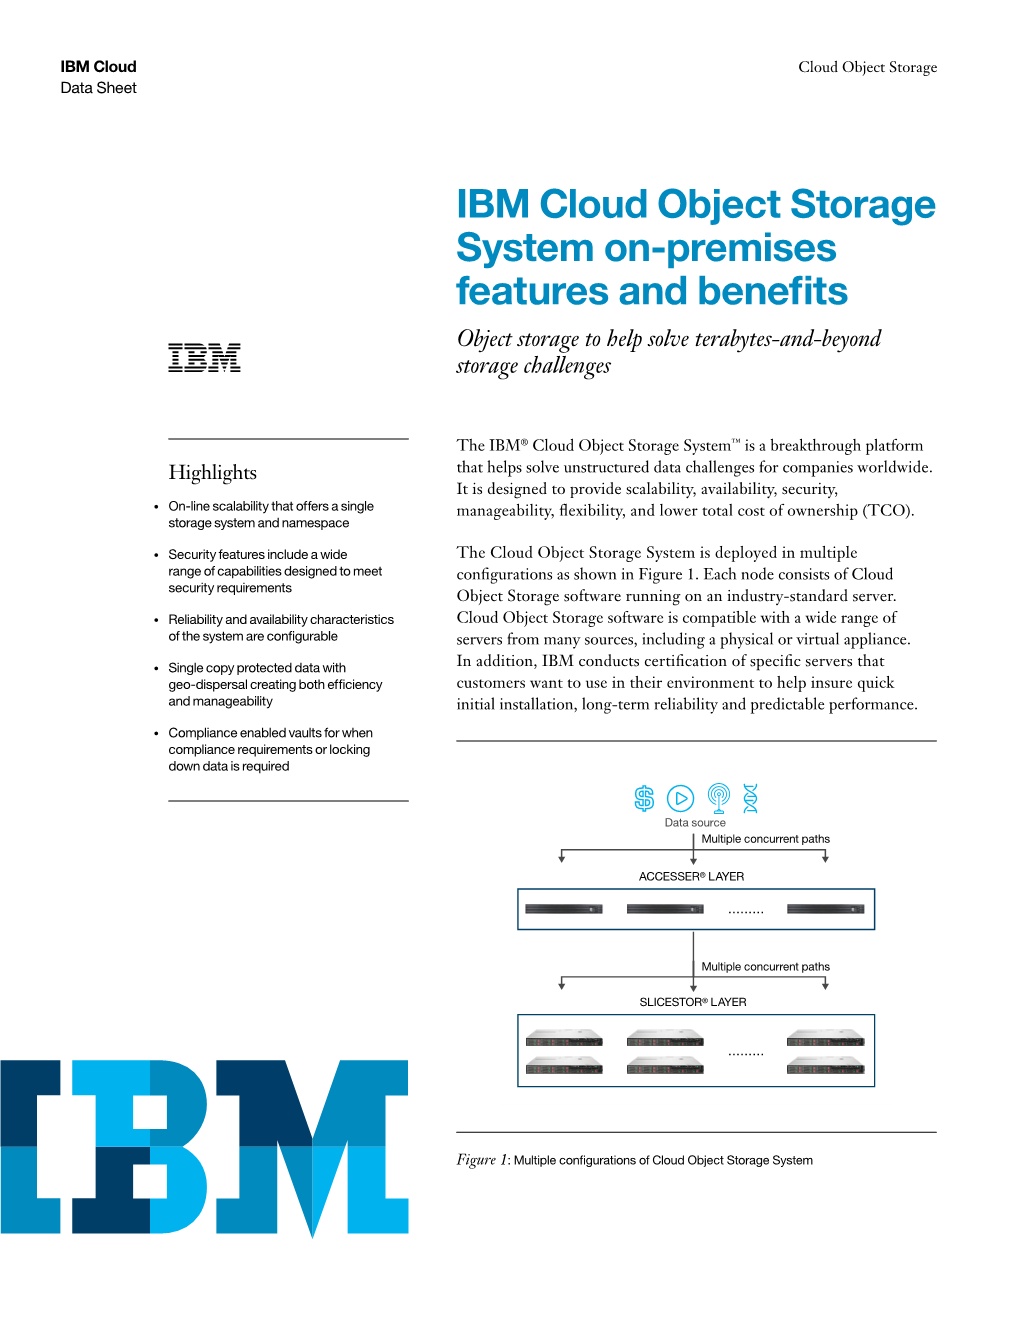 IBM Cloud Object Storage System On-Premises Features and Benefits Object Storage to Help Solve Terabytes-And-Beyond Storage Challenges